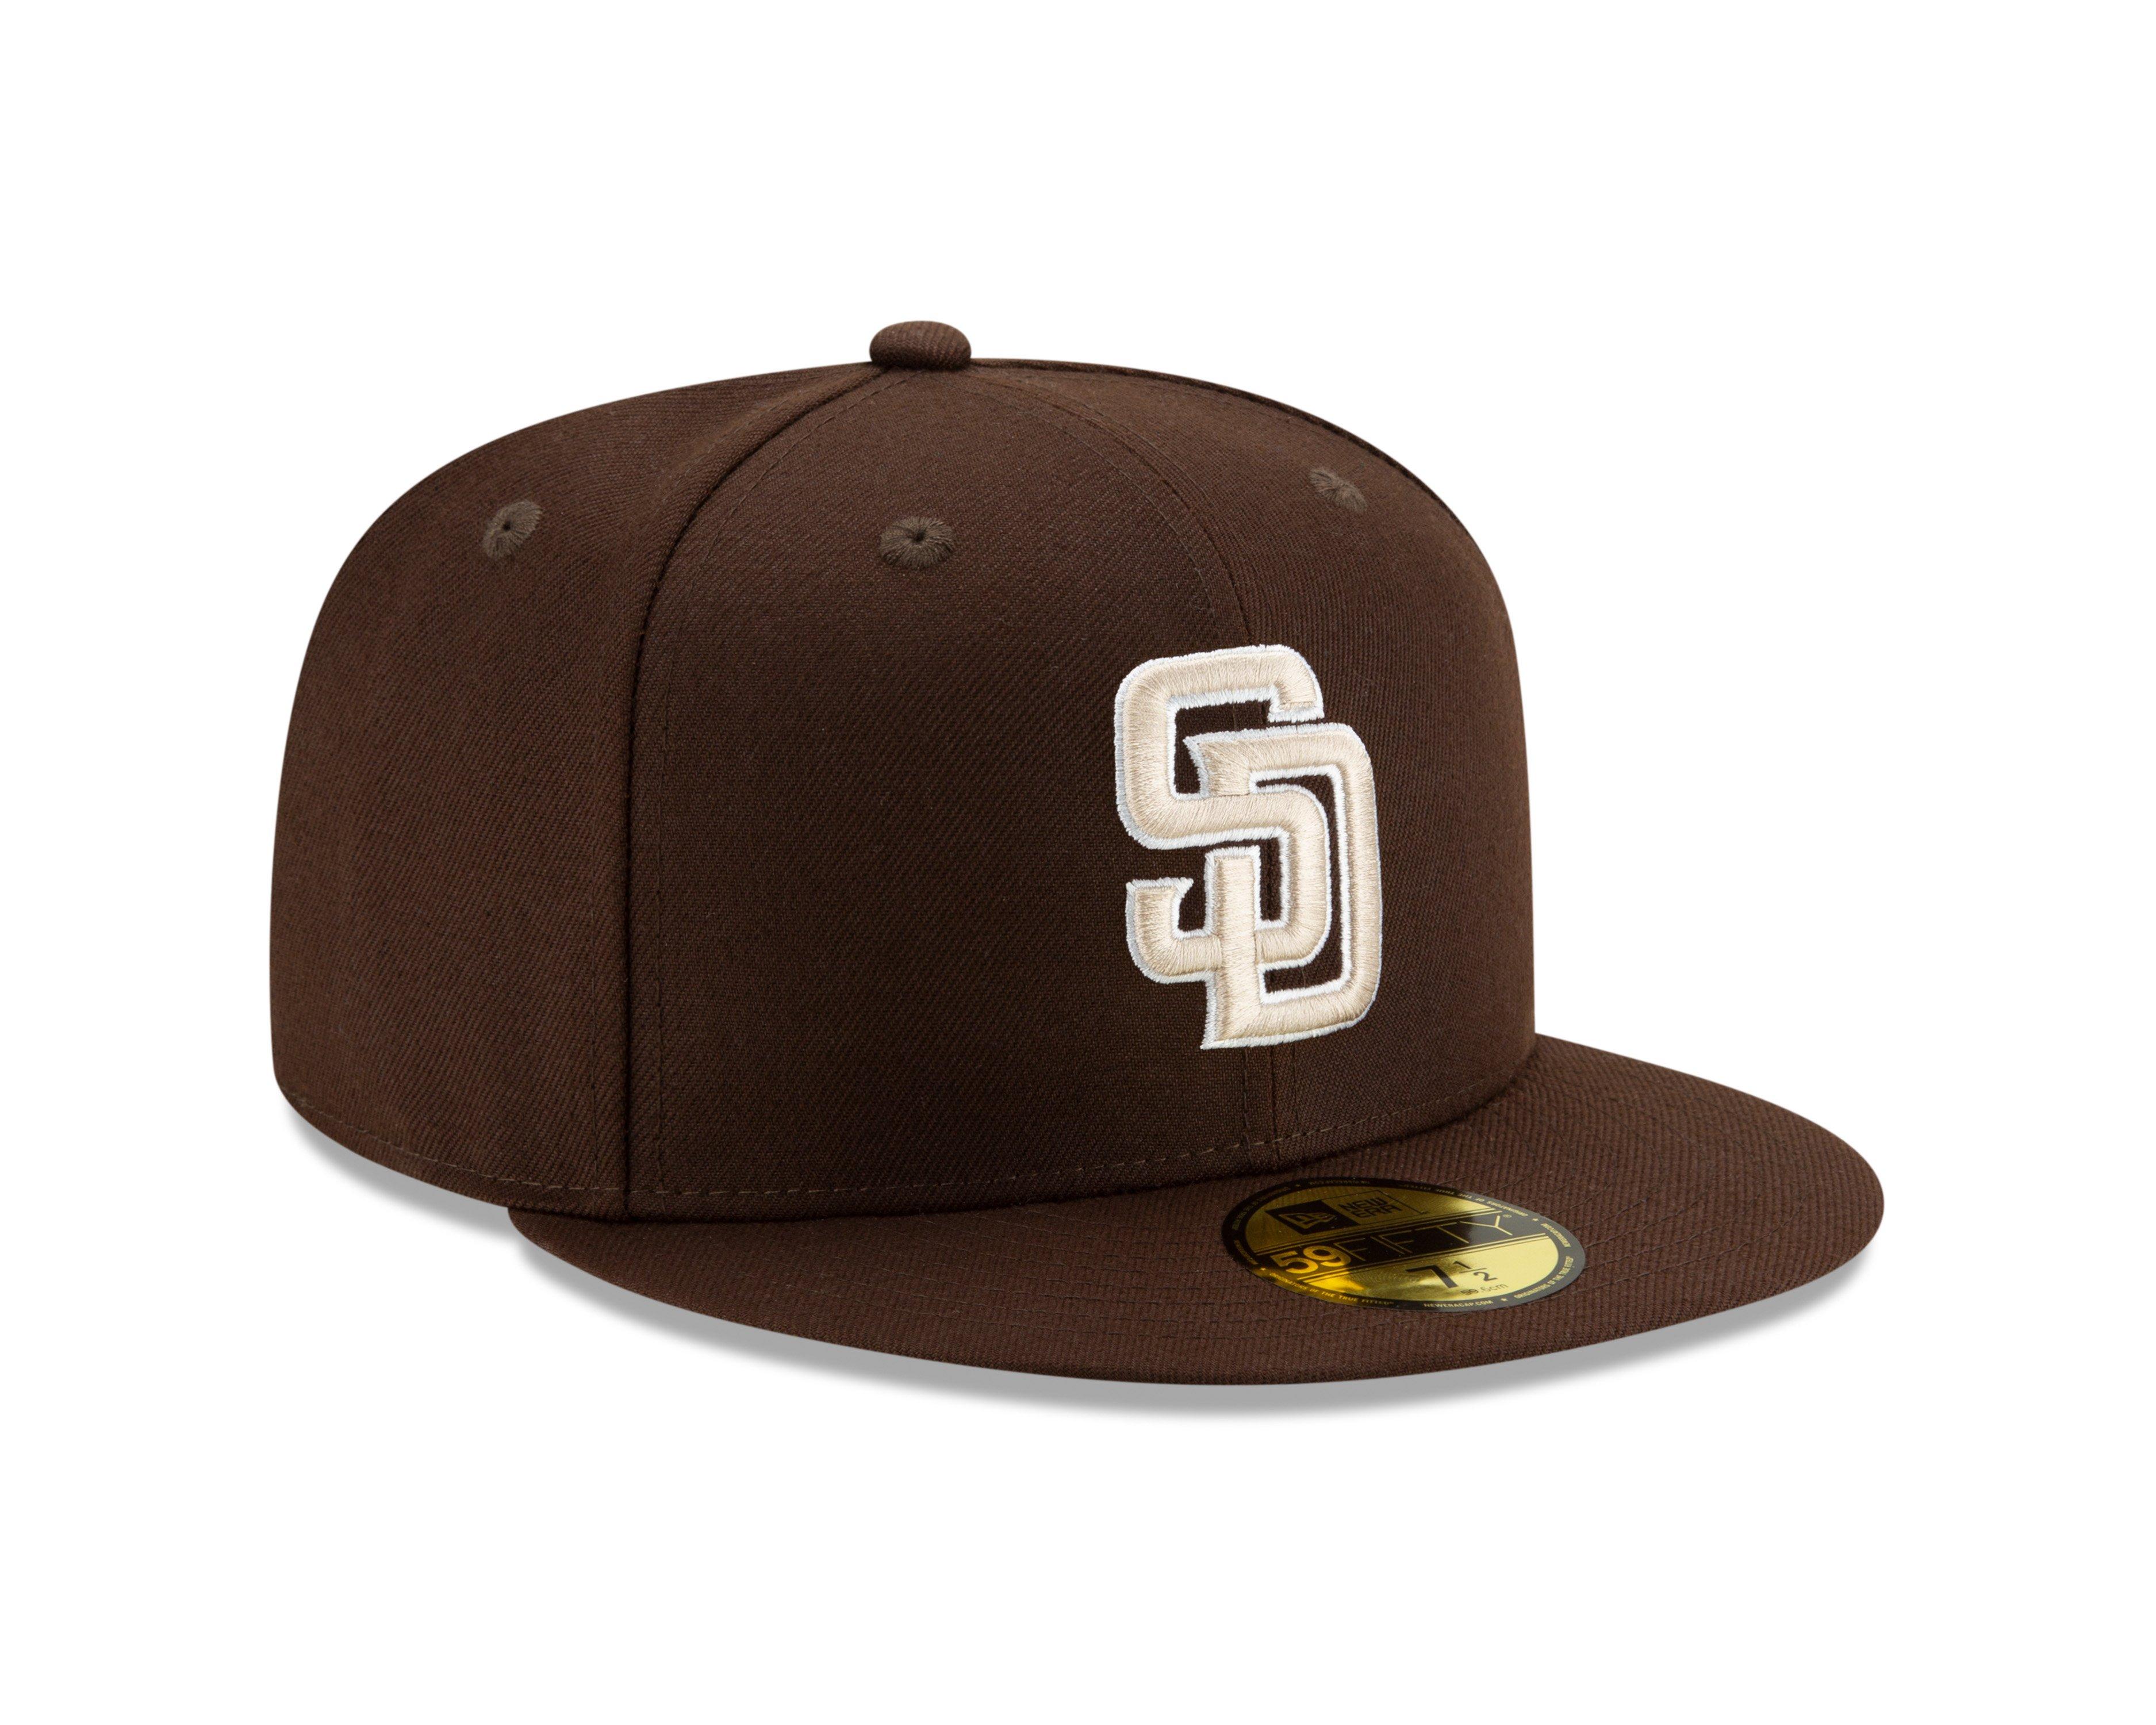 Official San Diego Padres Gear, Padres Jerseys, Store, San Diego Pro Shop,  Apparel